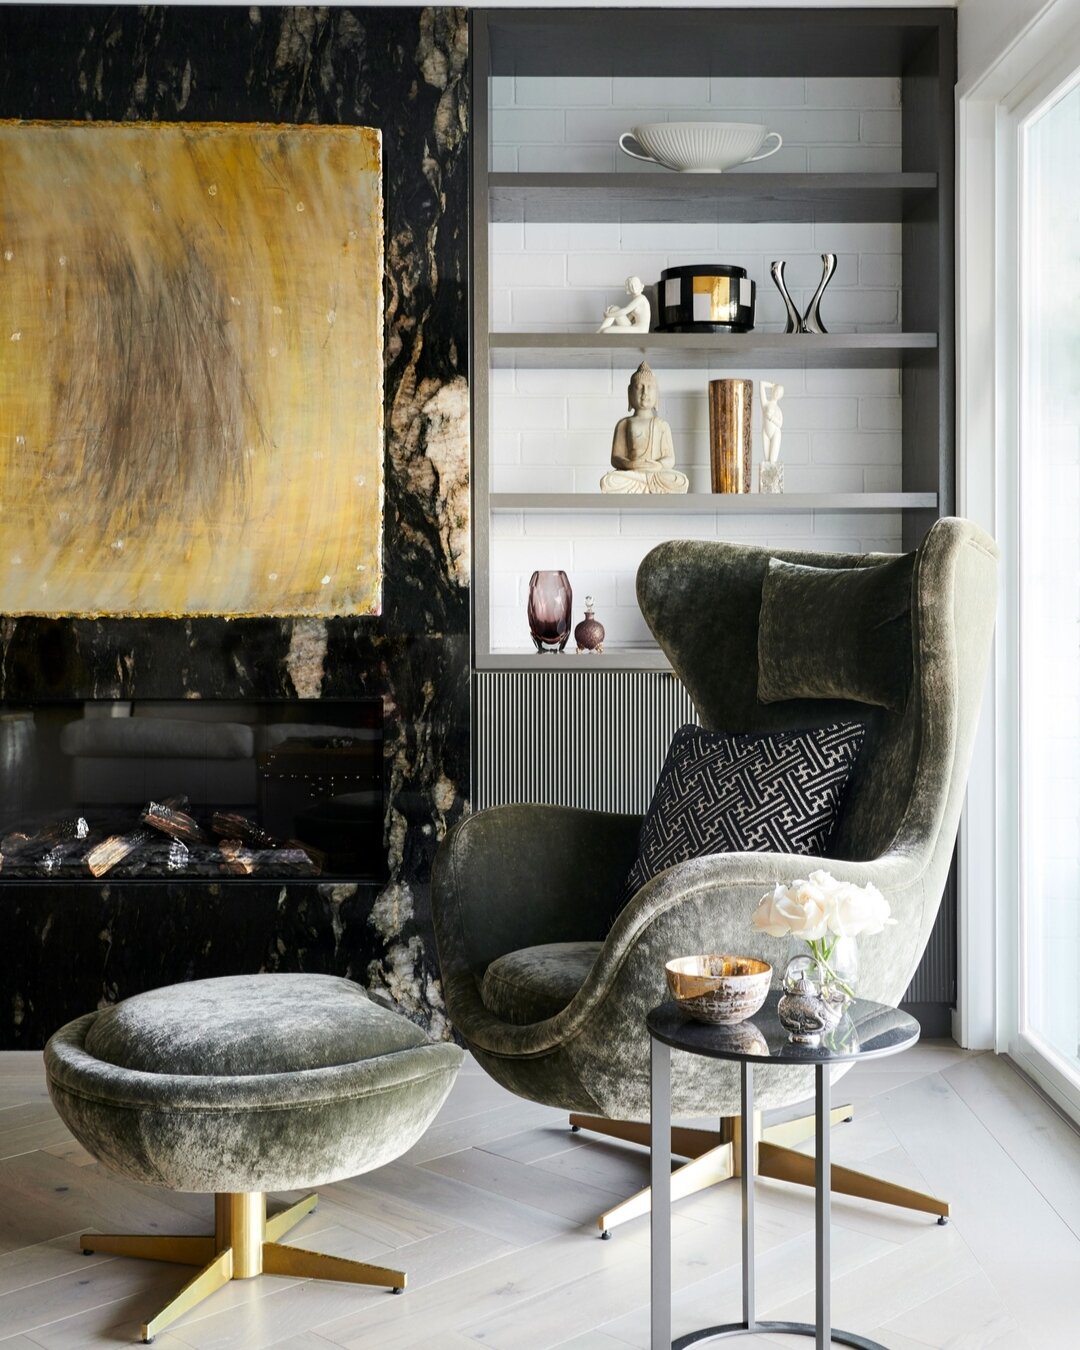 PORT STEPHENS HOUSE I - A large slab of dark quartzite serves as the striking centerpiece, exuding a sense of luxury and sophistication. Nestled nearby, an egg chair in plush velvet invites you to unwind and relax by the cozy fire. The herringbone fl